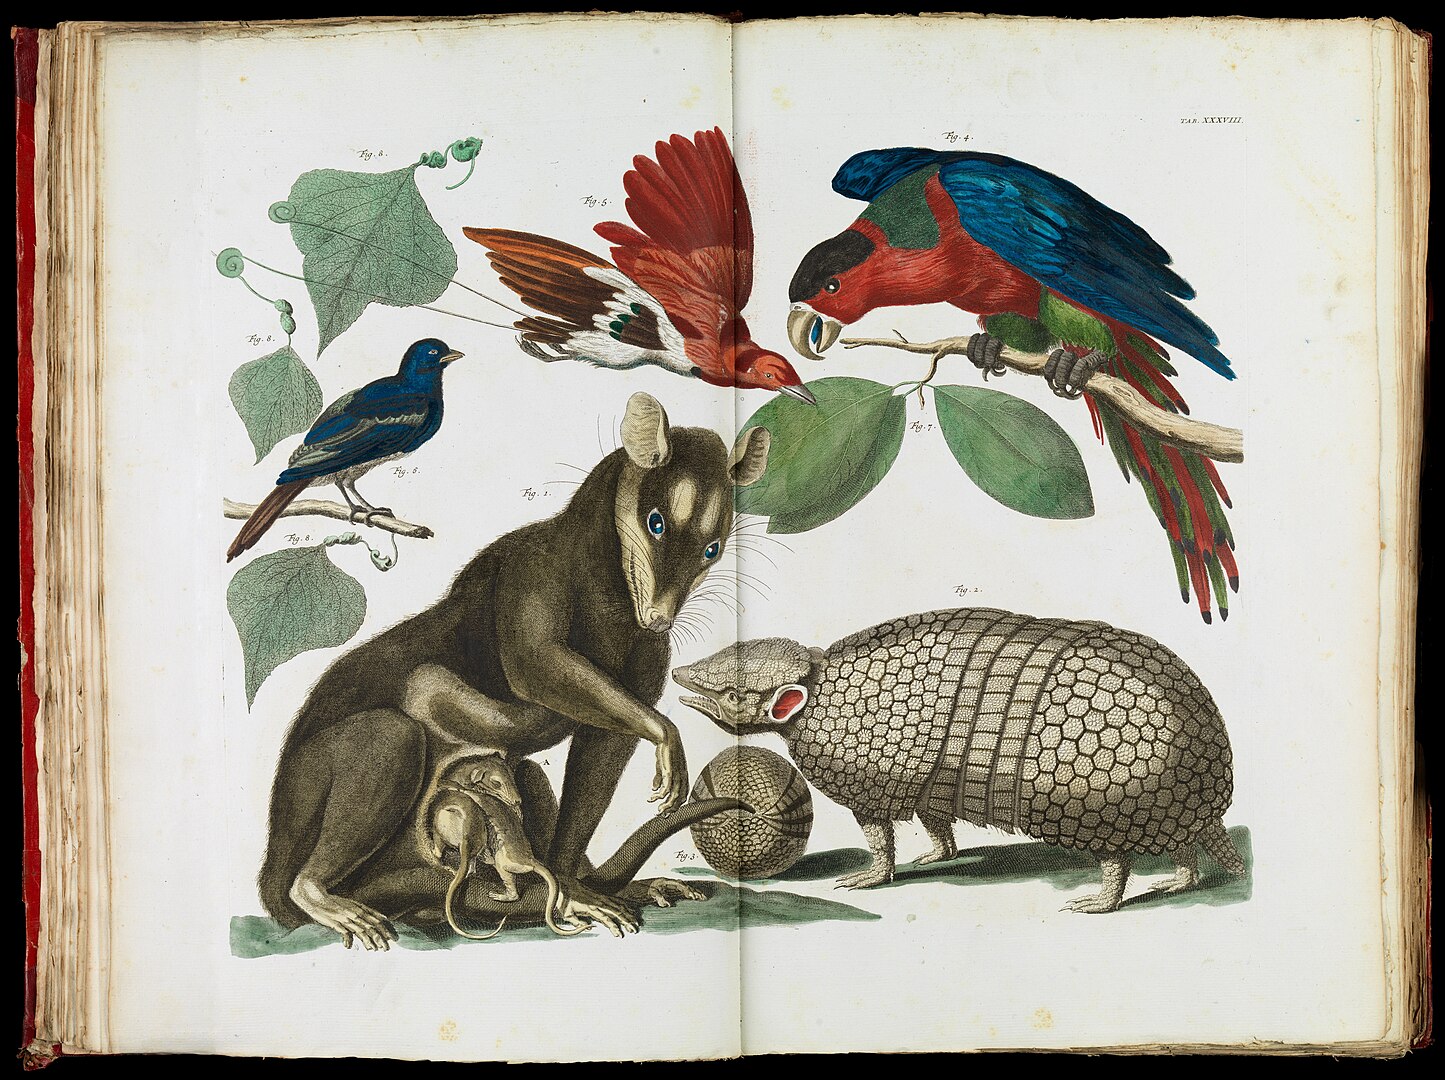 A realistic illustration depicting animals including birds and marsupials.